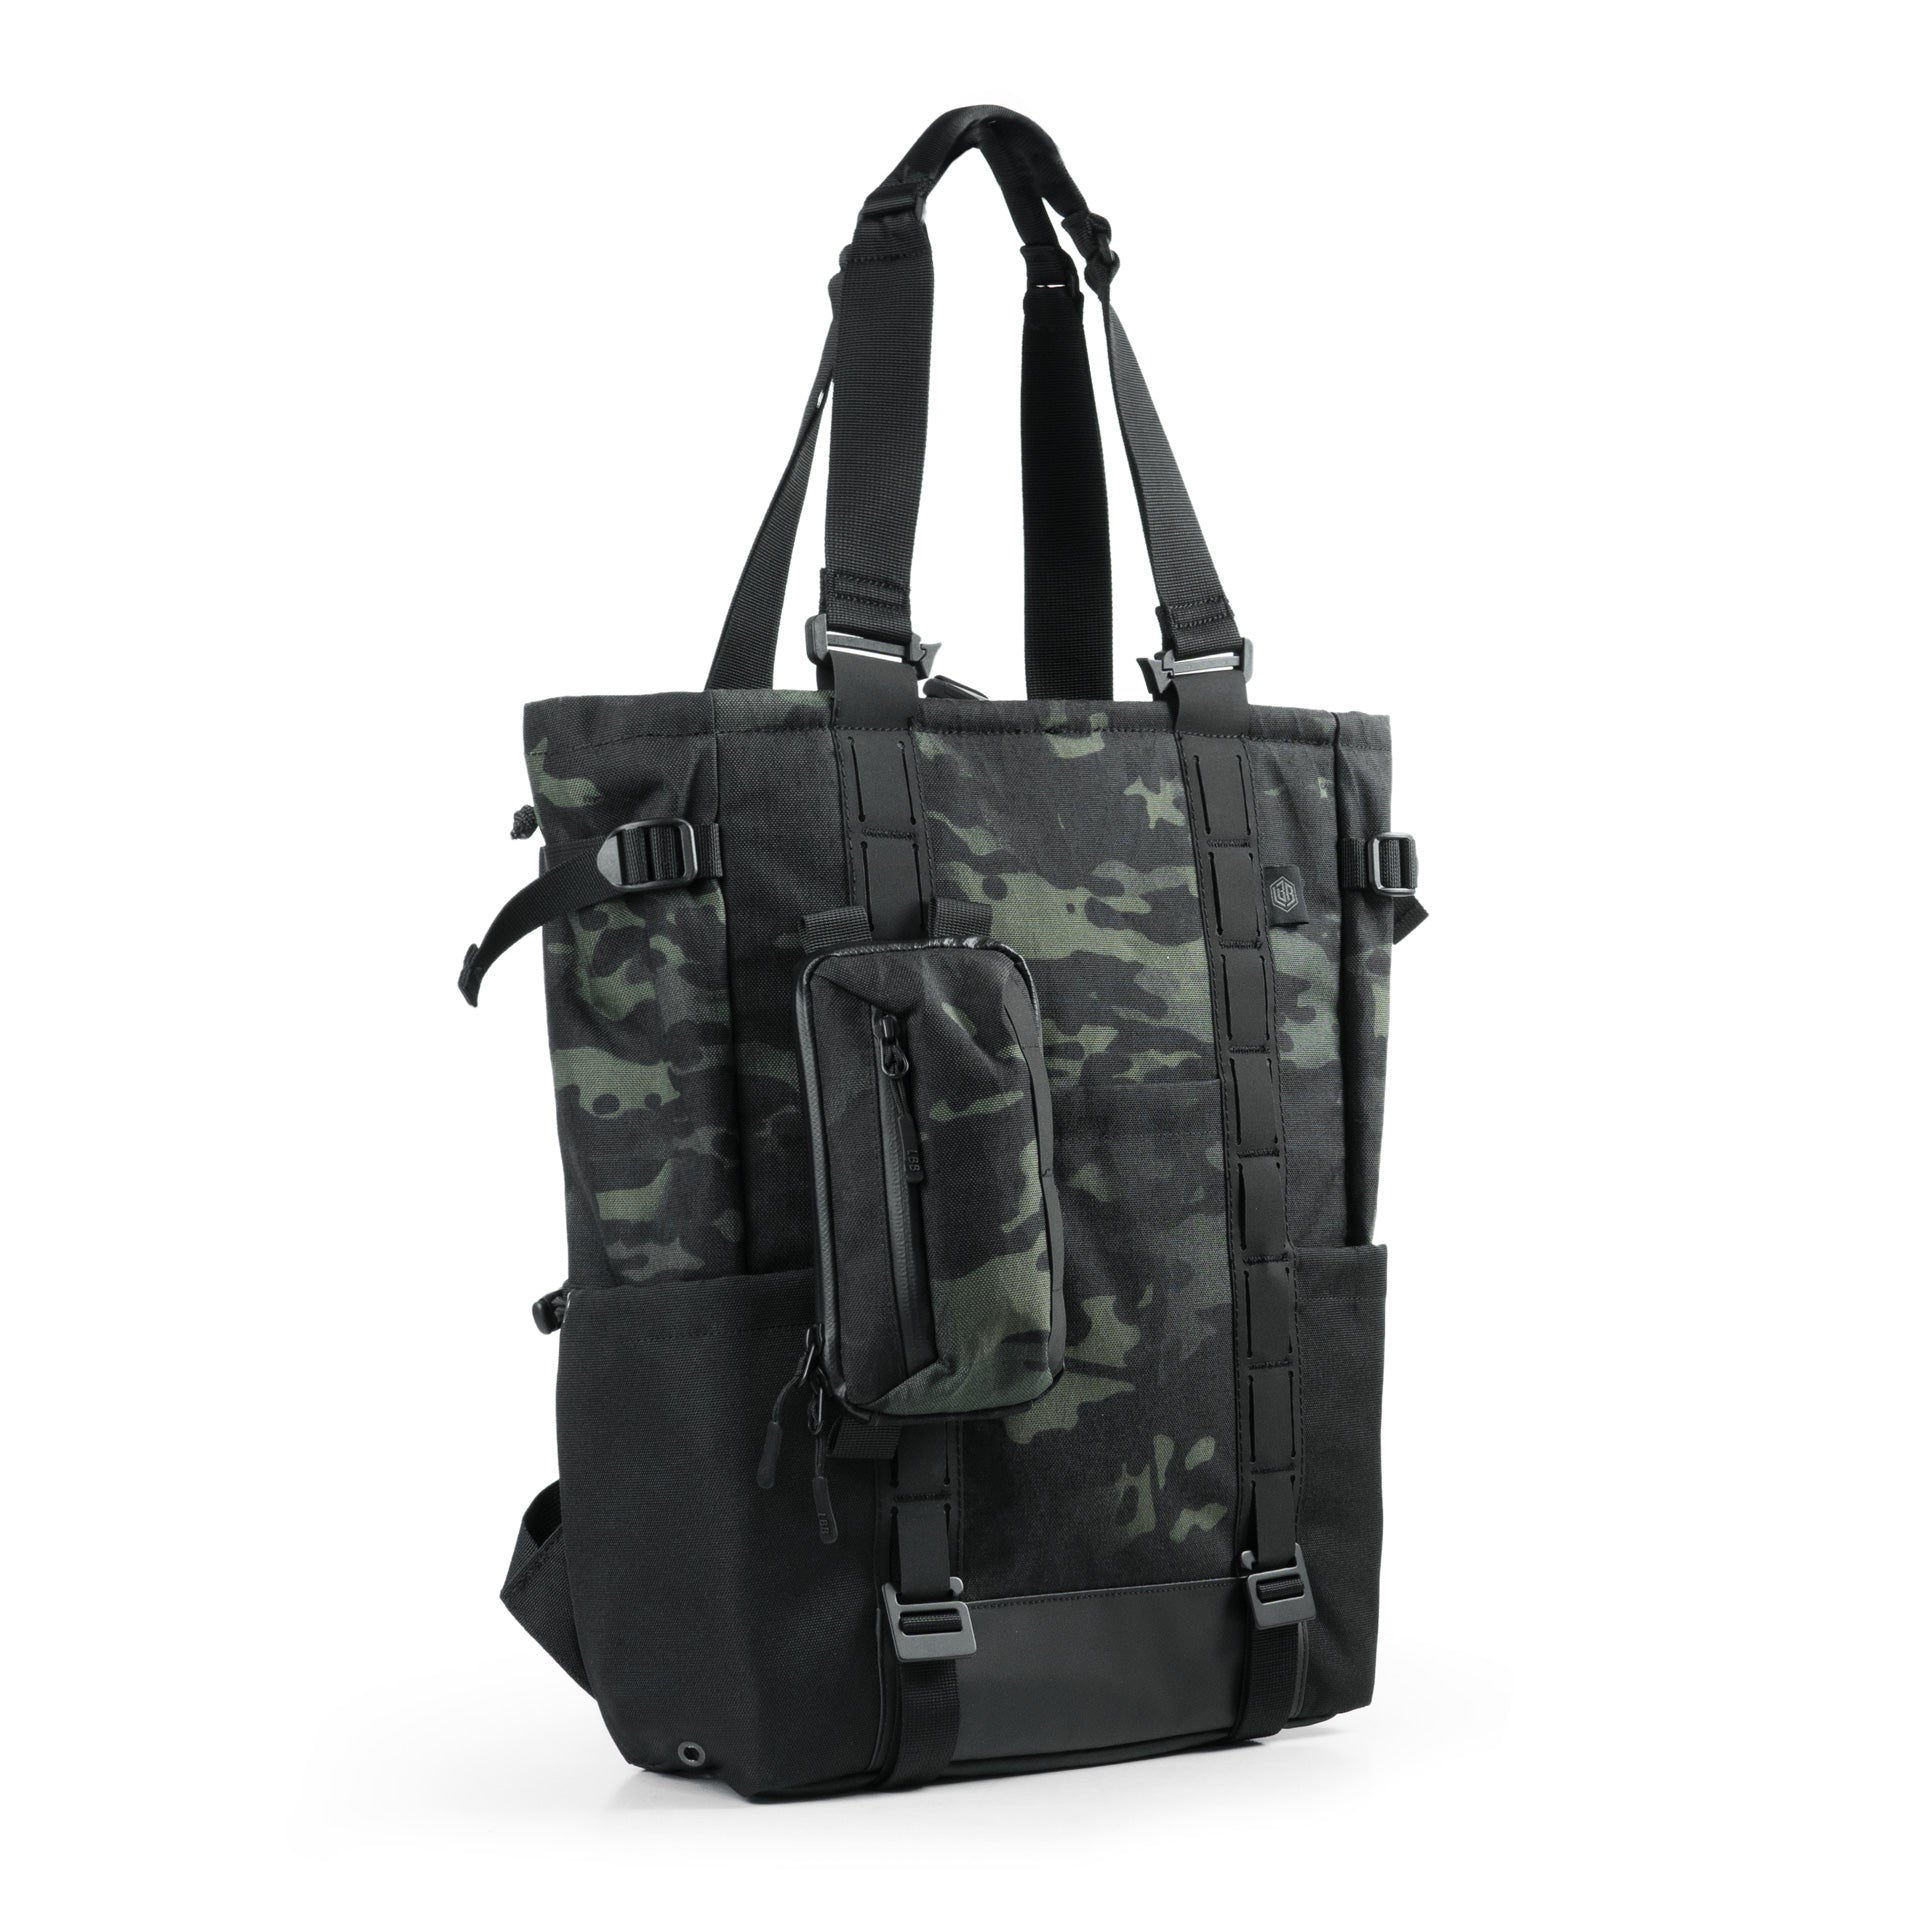 Transition Totepack Division Pouch